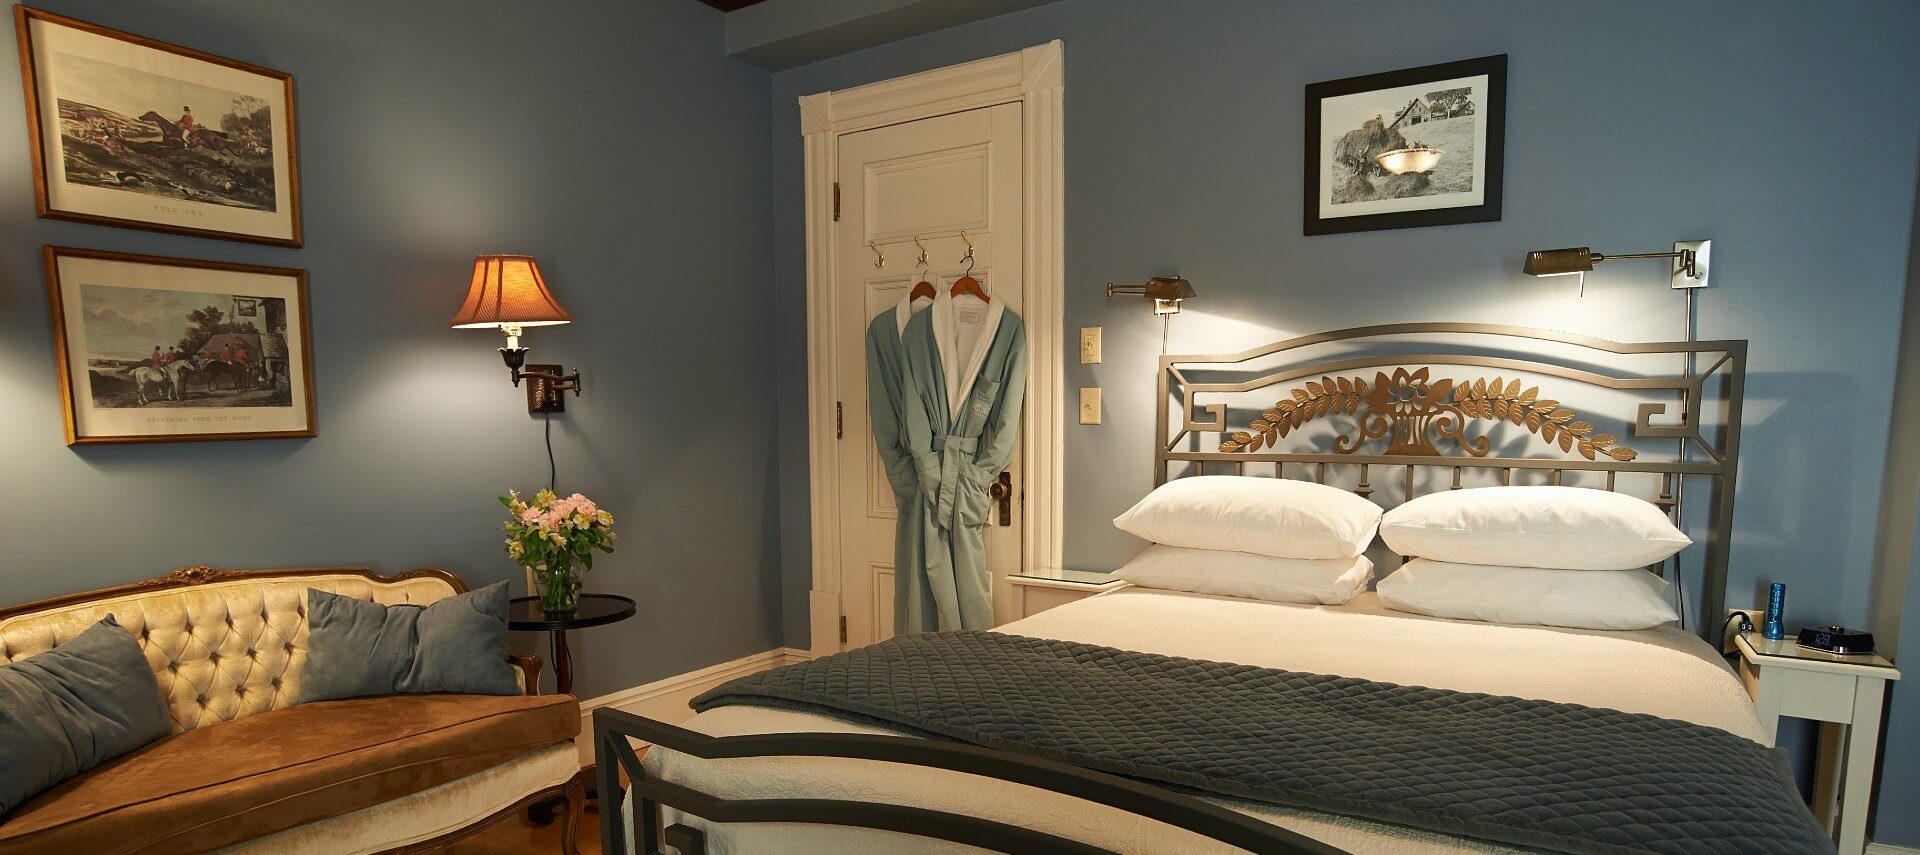 Bedroom with light blue walls, bed with white linens and iron frame, white tufted couch and two robes hanging on the door.